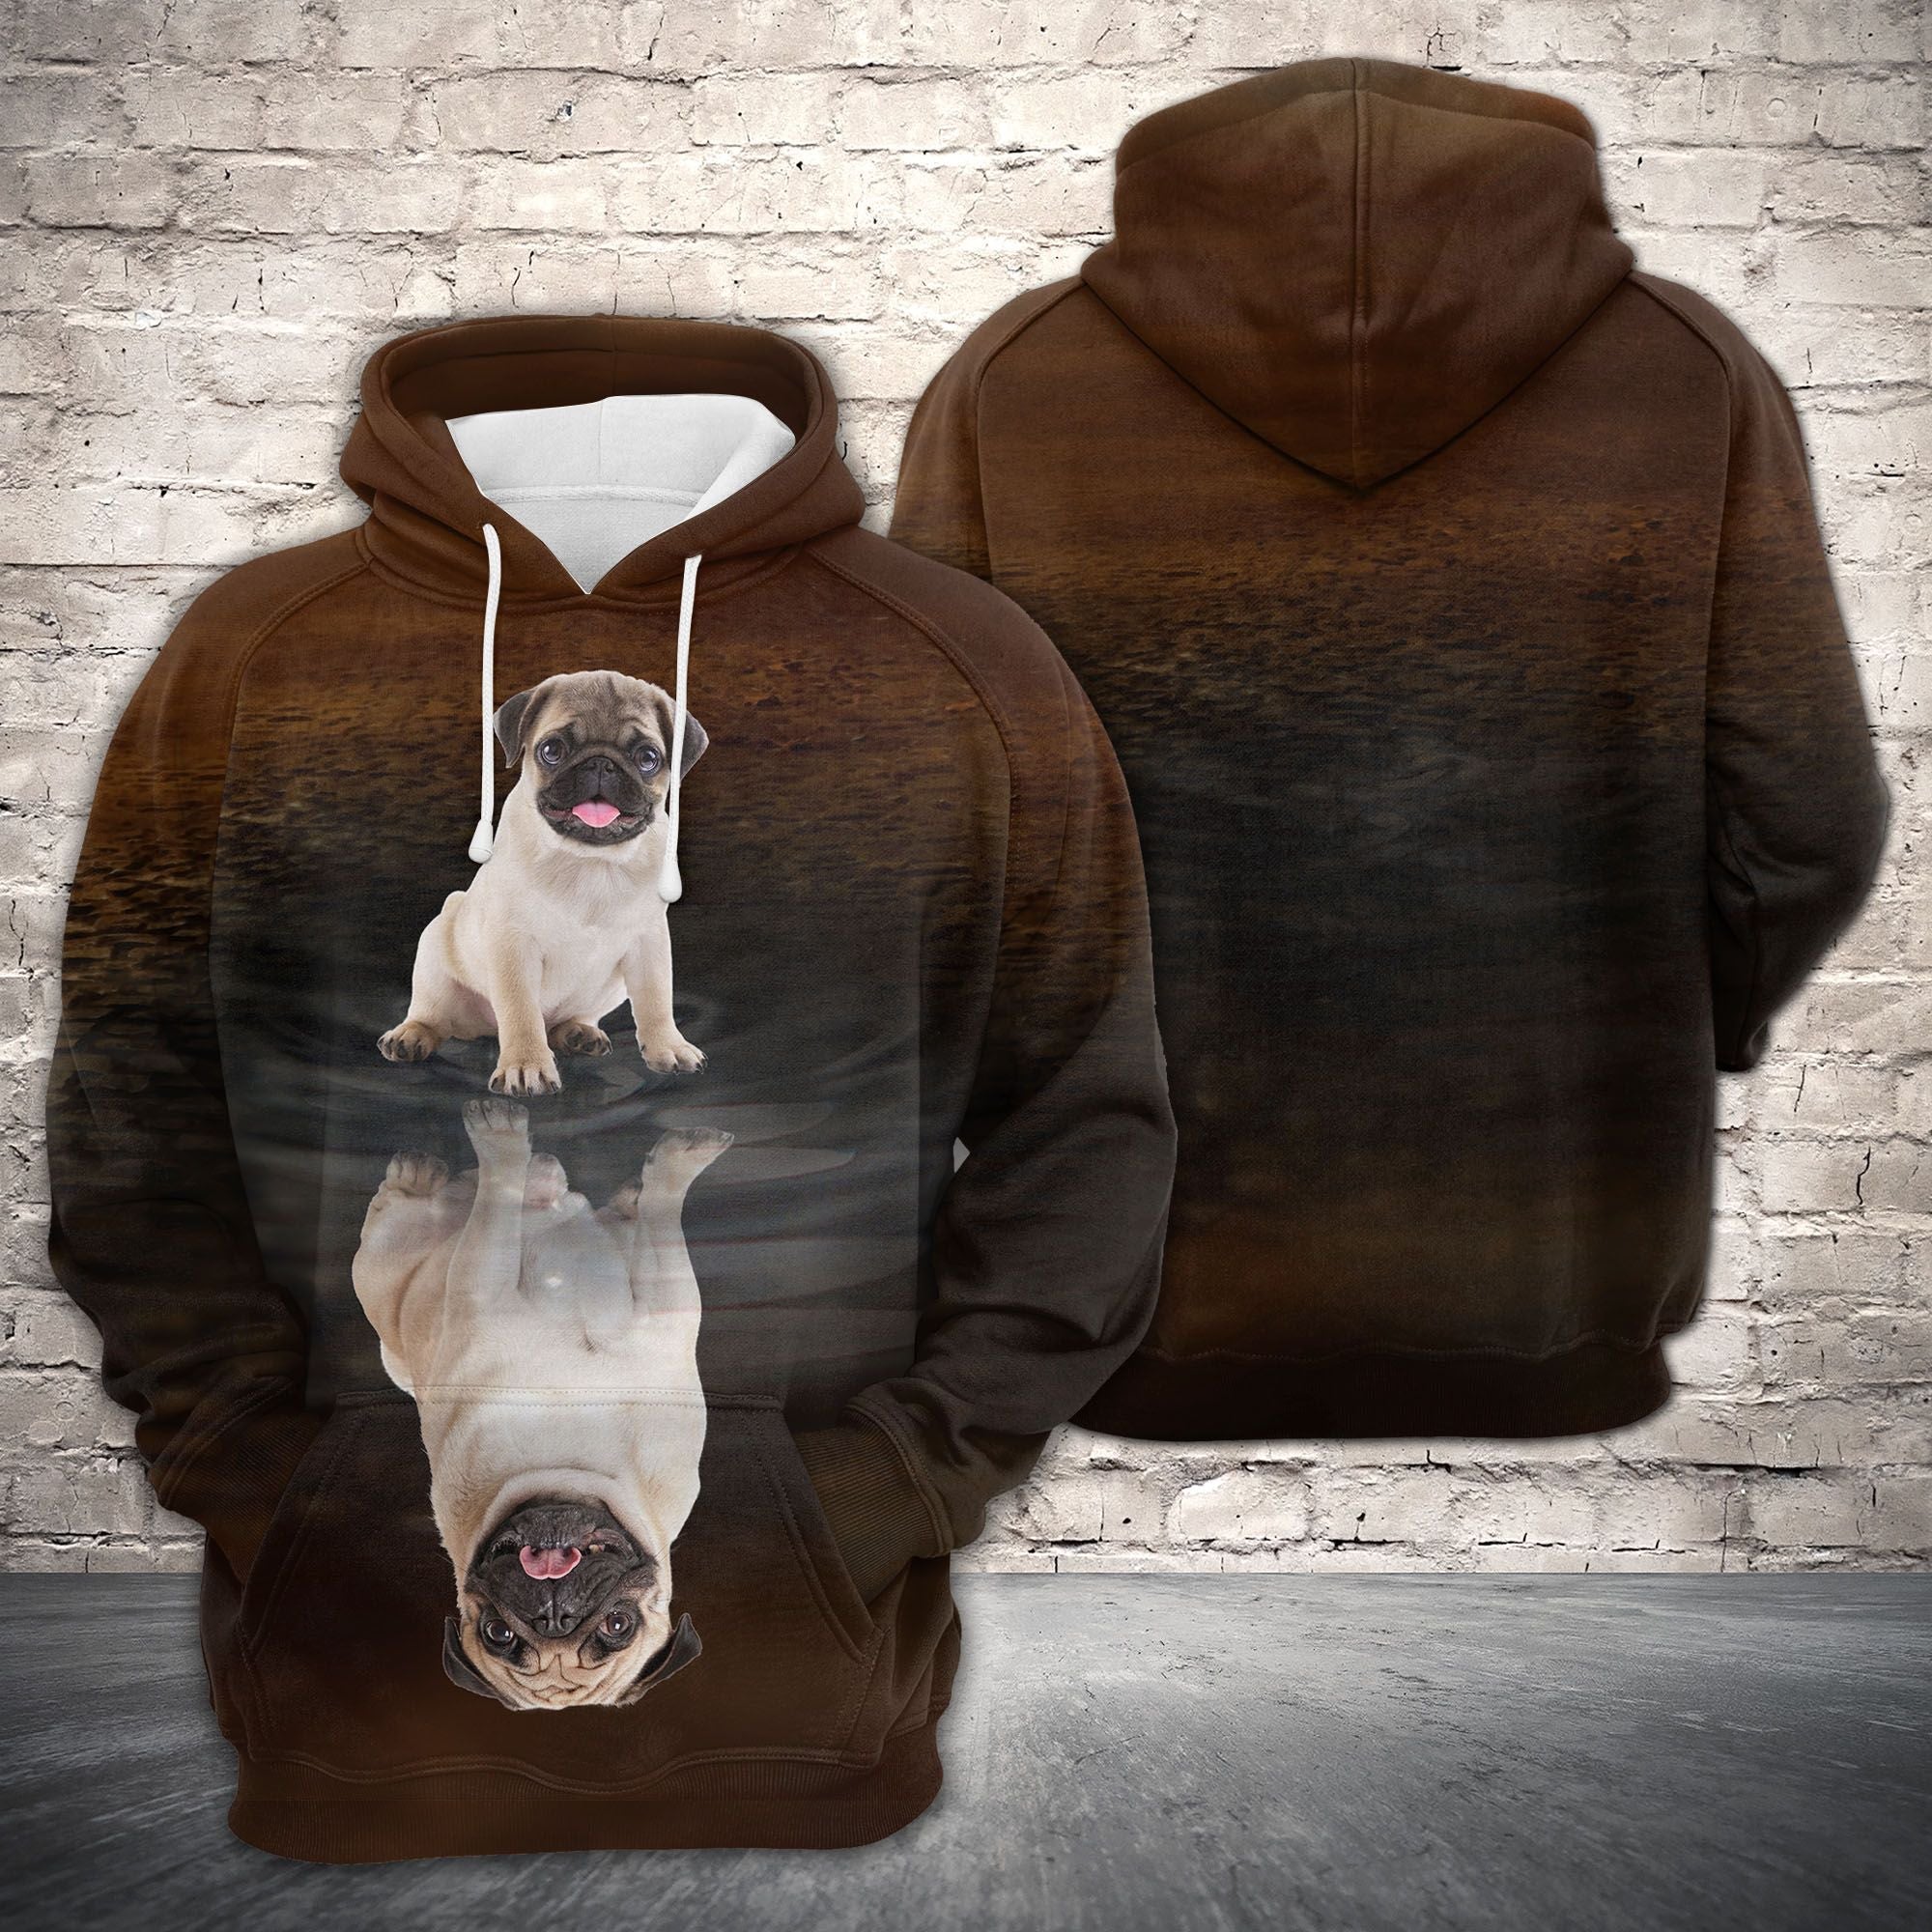 Cute Pug Pullover Premium Hoodie, Perfect Outfit For Men And Women On Christmas New Year Autumn Winter